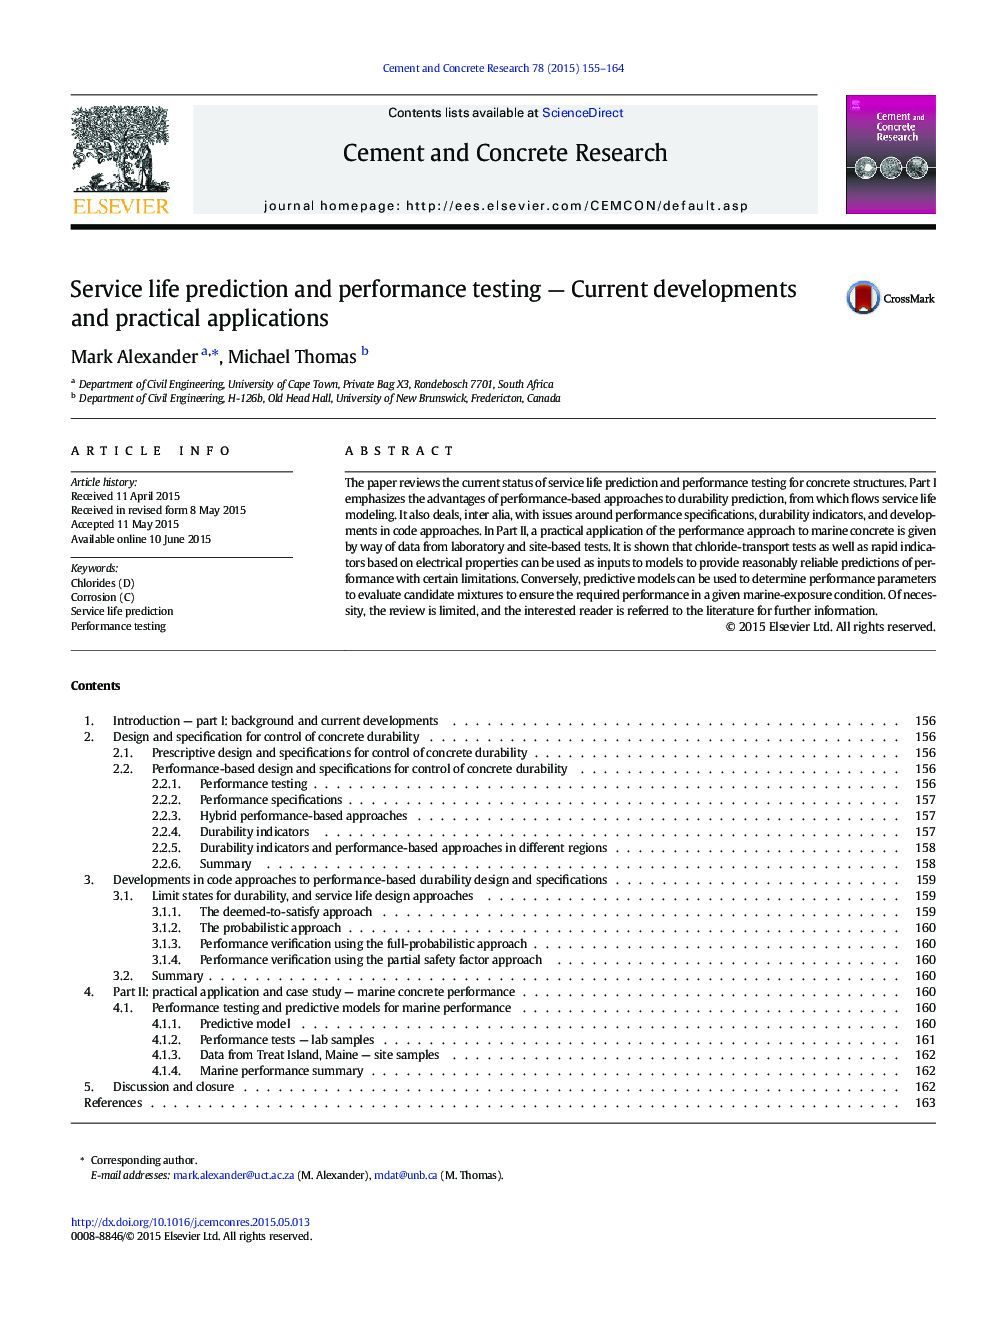 Service life prediction and performance testing — Current developments and practical applications